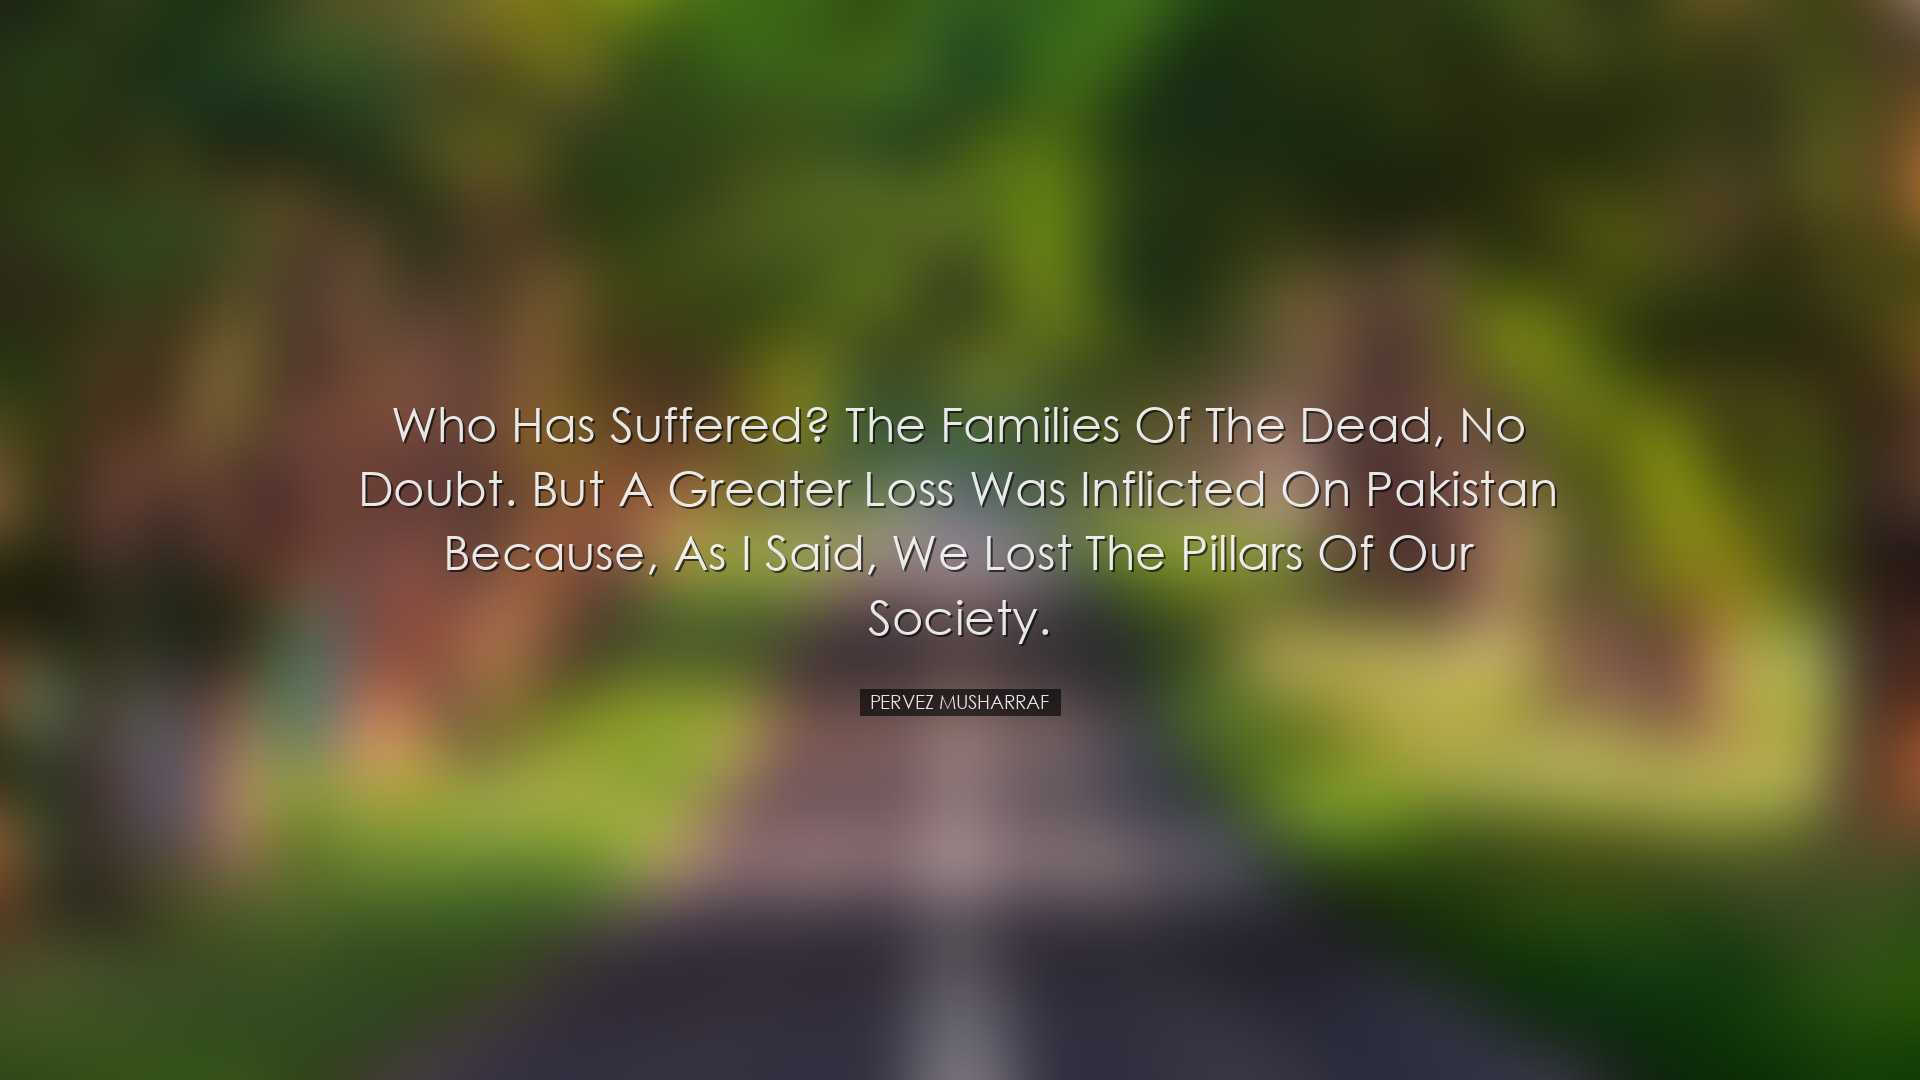 Who has suffered? The families of the dead, no doubt. But a greate